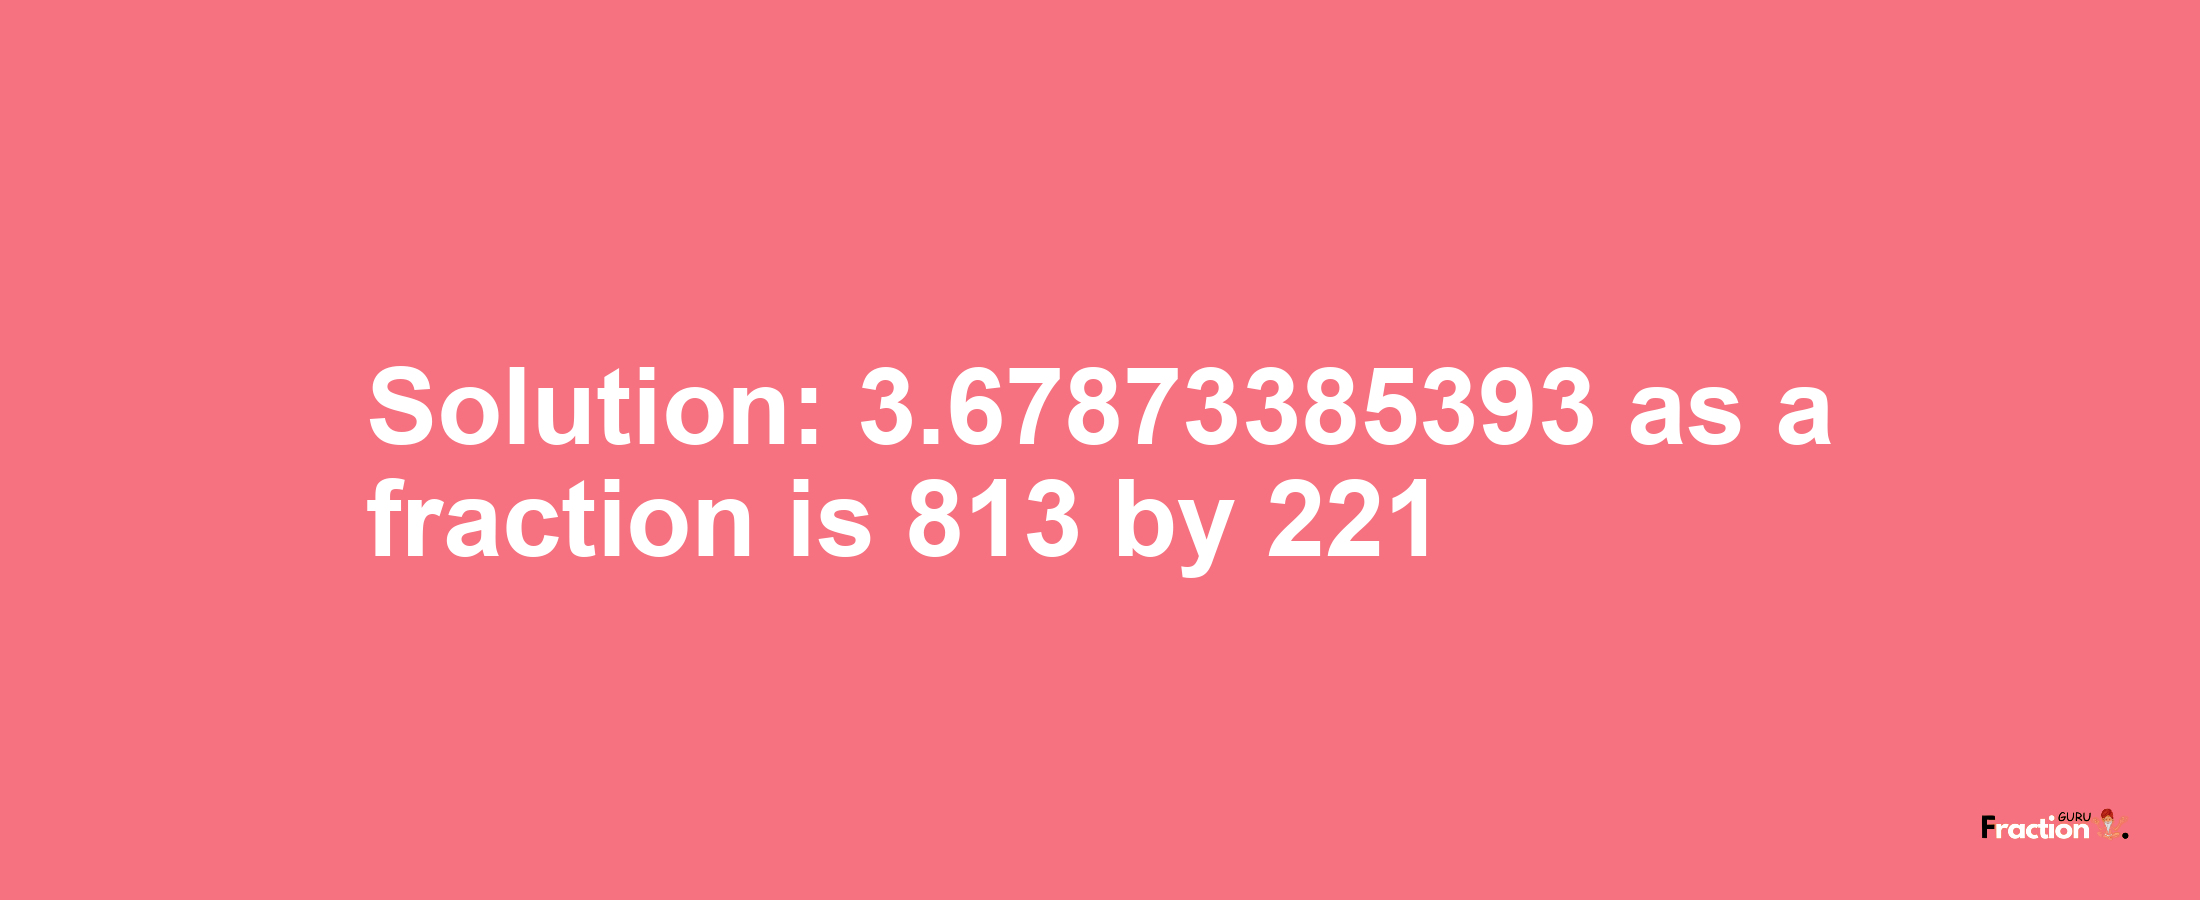 Solution:3.67873385393 as a fraction is 813/221